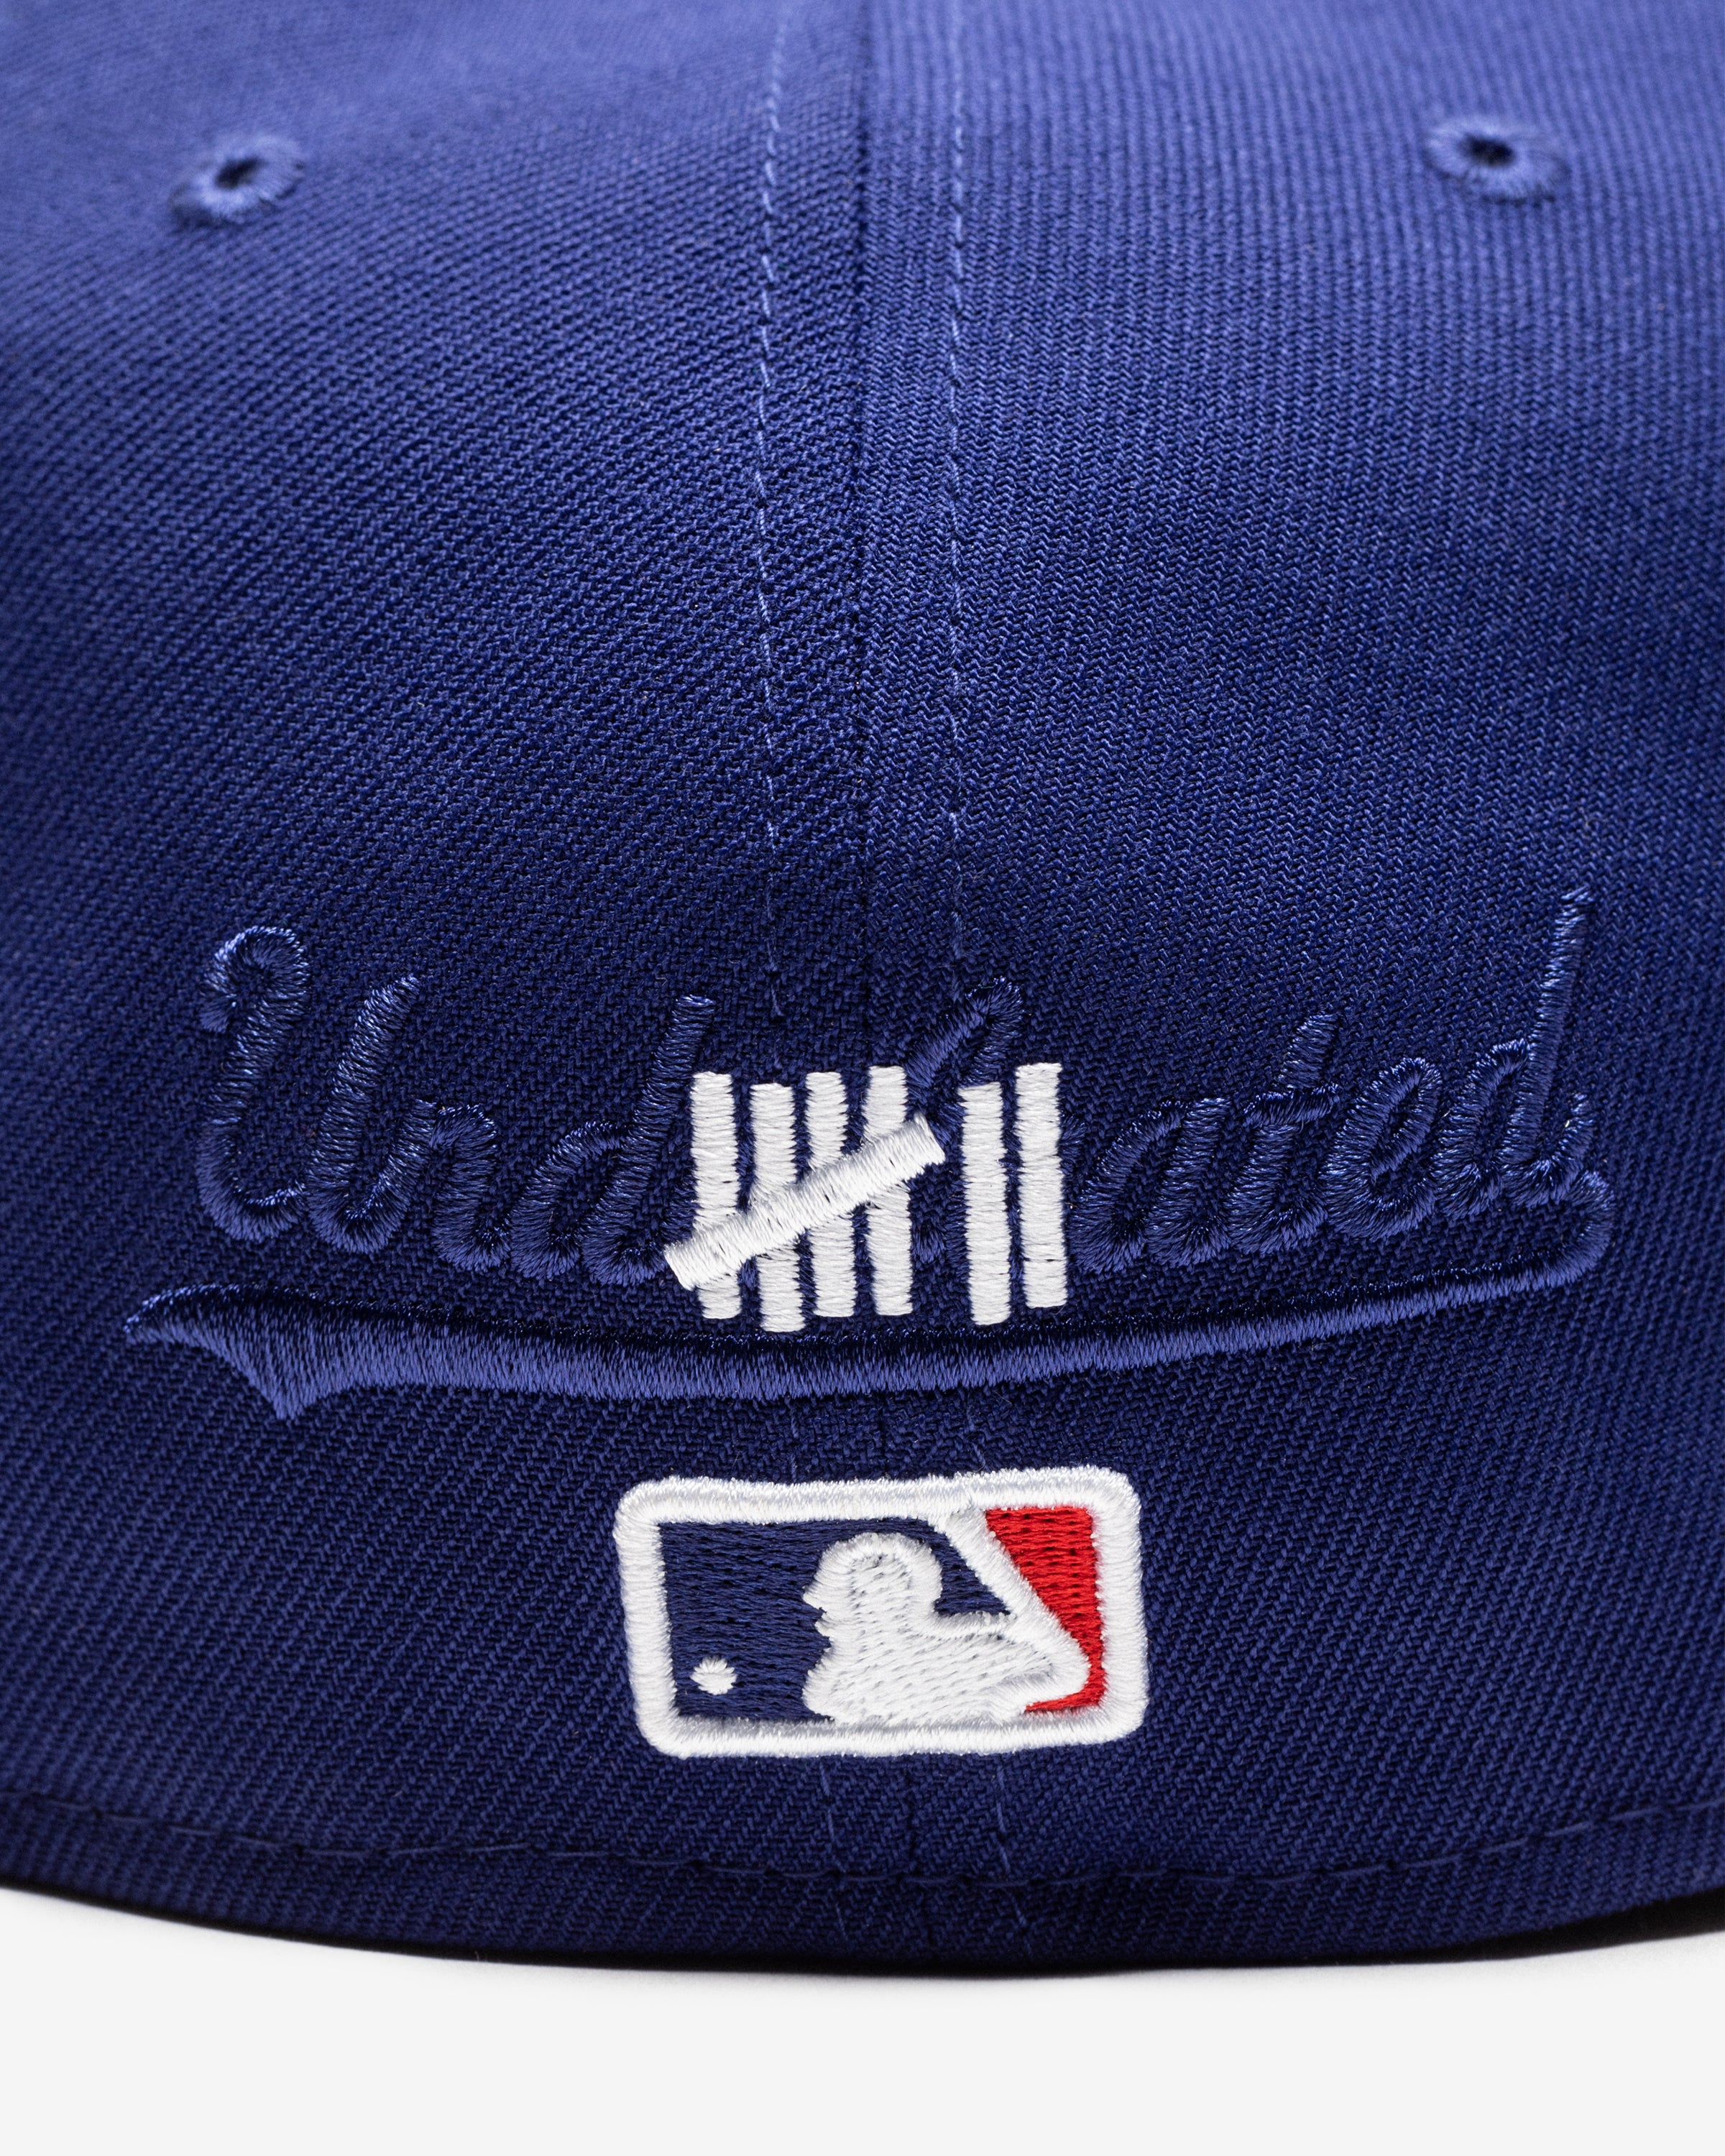 New Era Los Angeles Dodgers World Champions 59FIFTY Fitted in Royal — Major